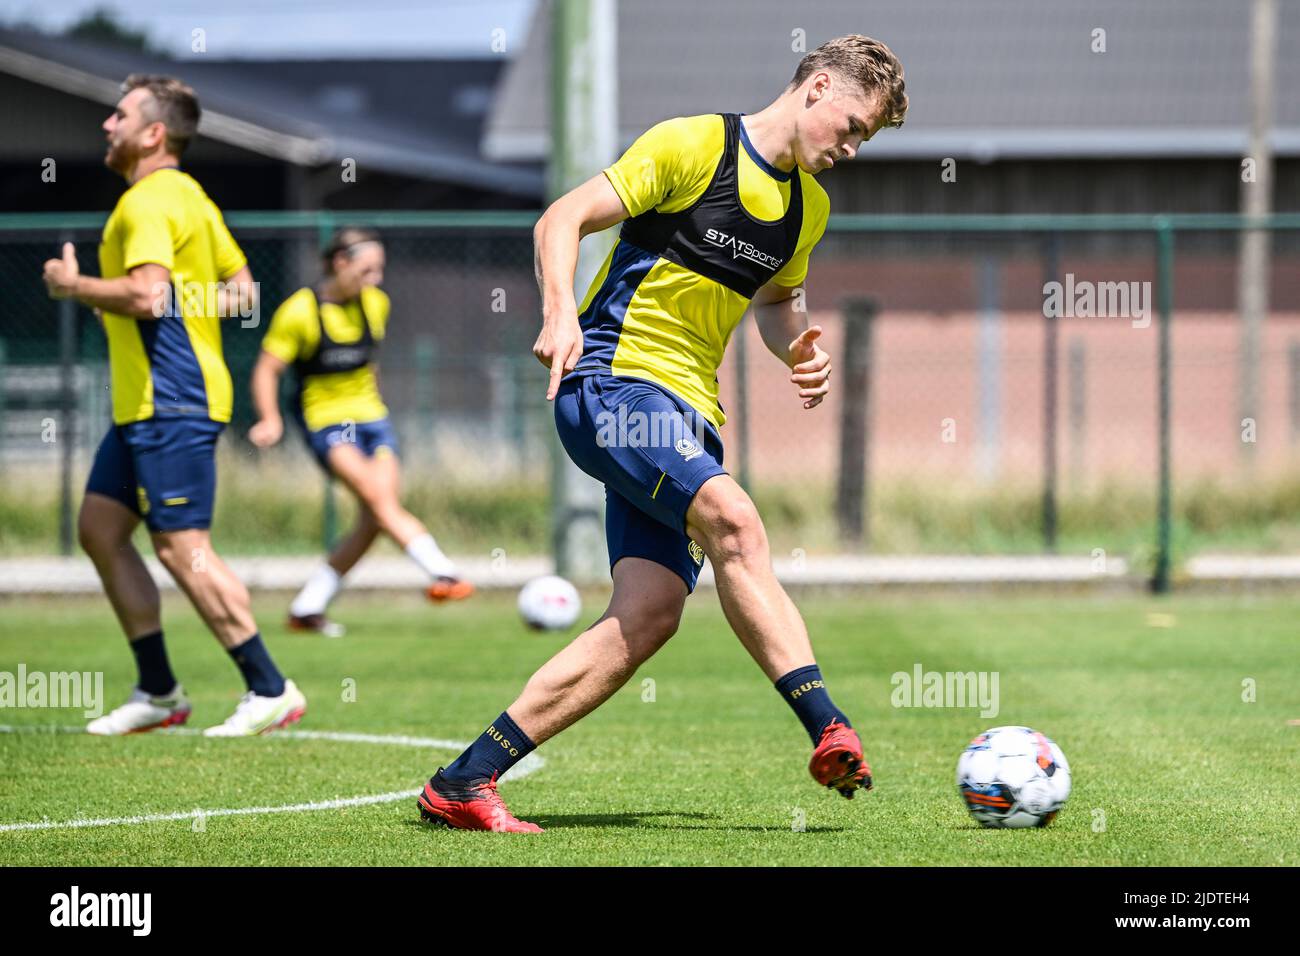 Union's Viktor Boone pictured during a training session ahead of the 2022-2023 season, of Belgian first division soccer team Royale Union Saint-Gilloise, Thursday 23 June 2022 in Lier. BELGA PHOTO TOM GOYVAERTS Stock Photo